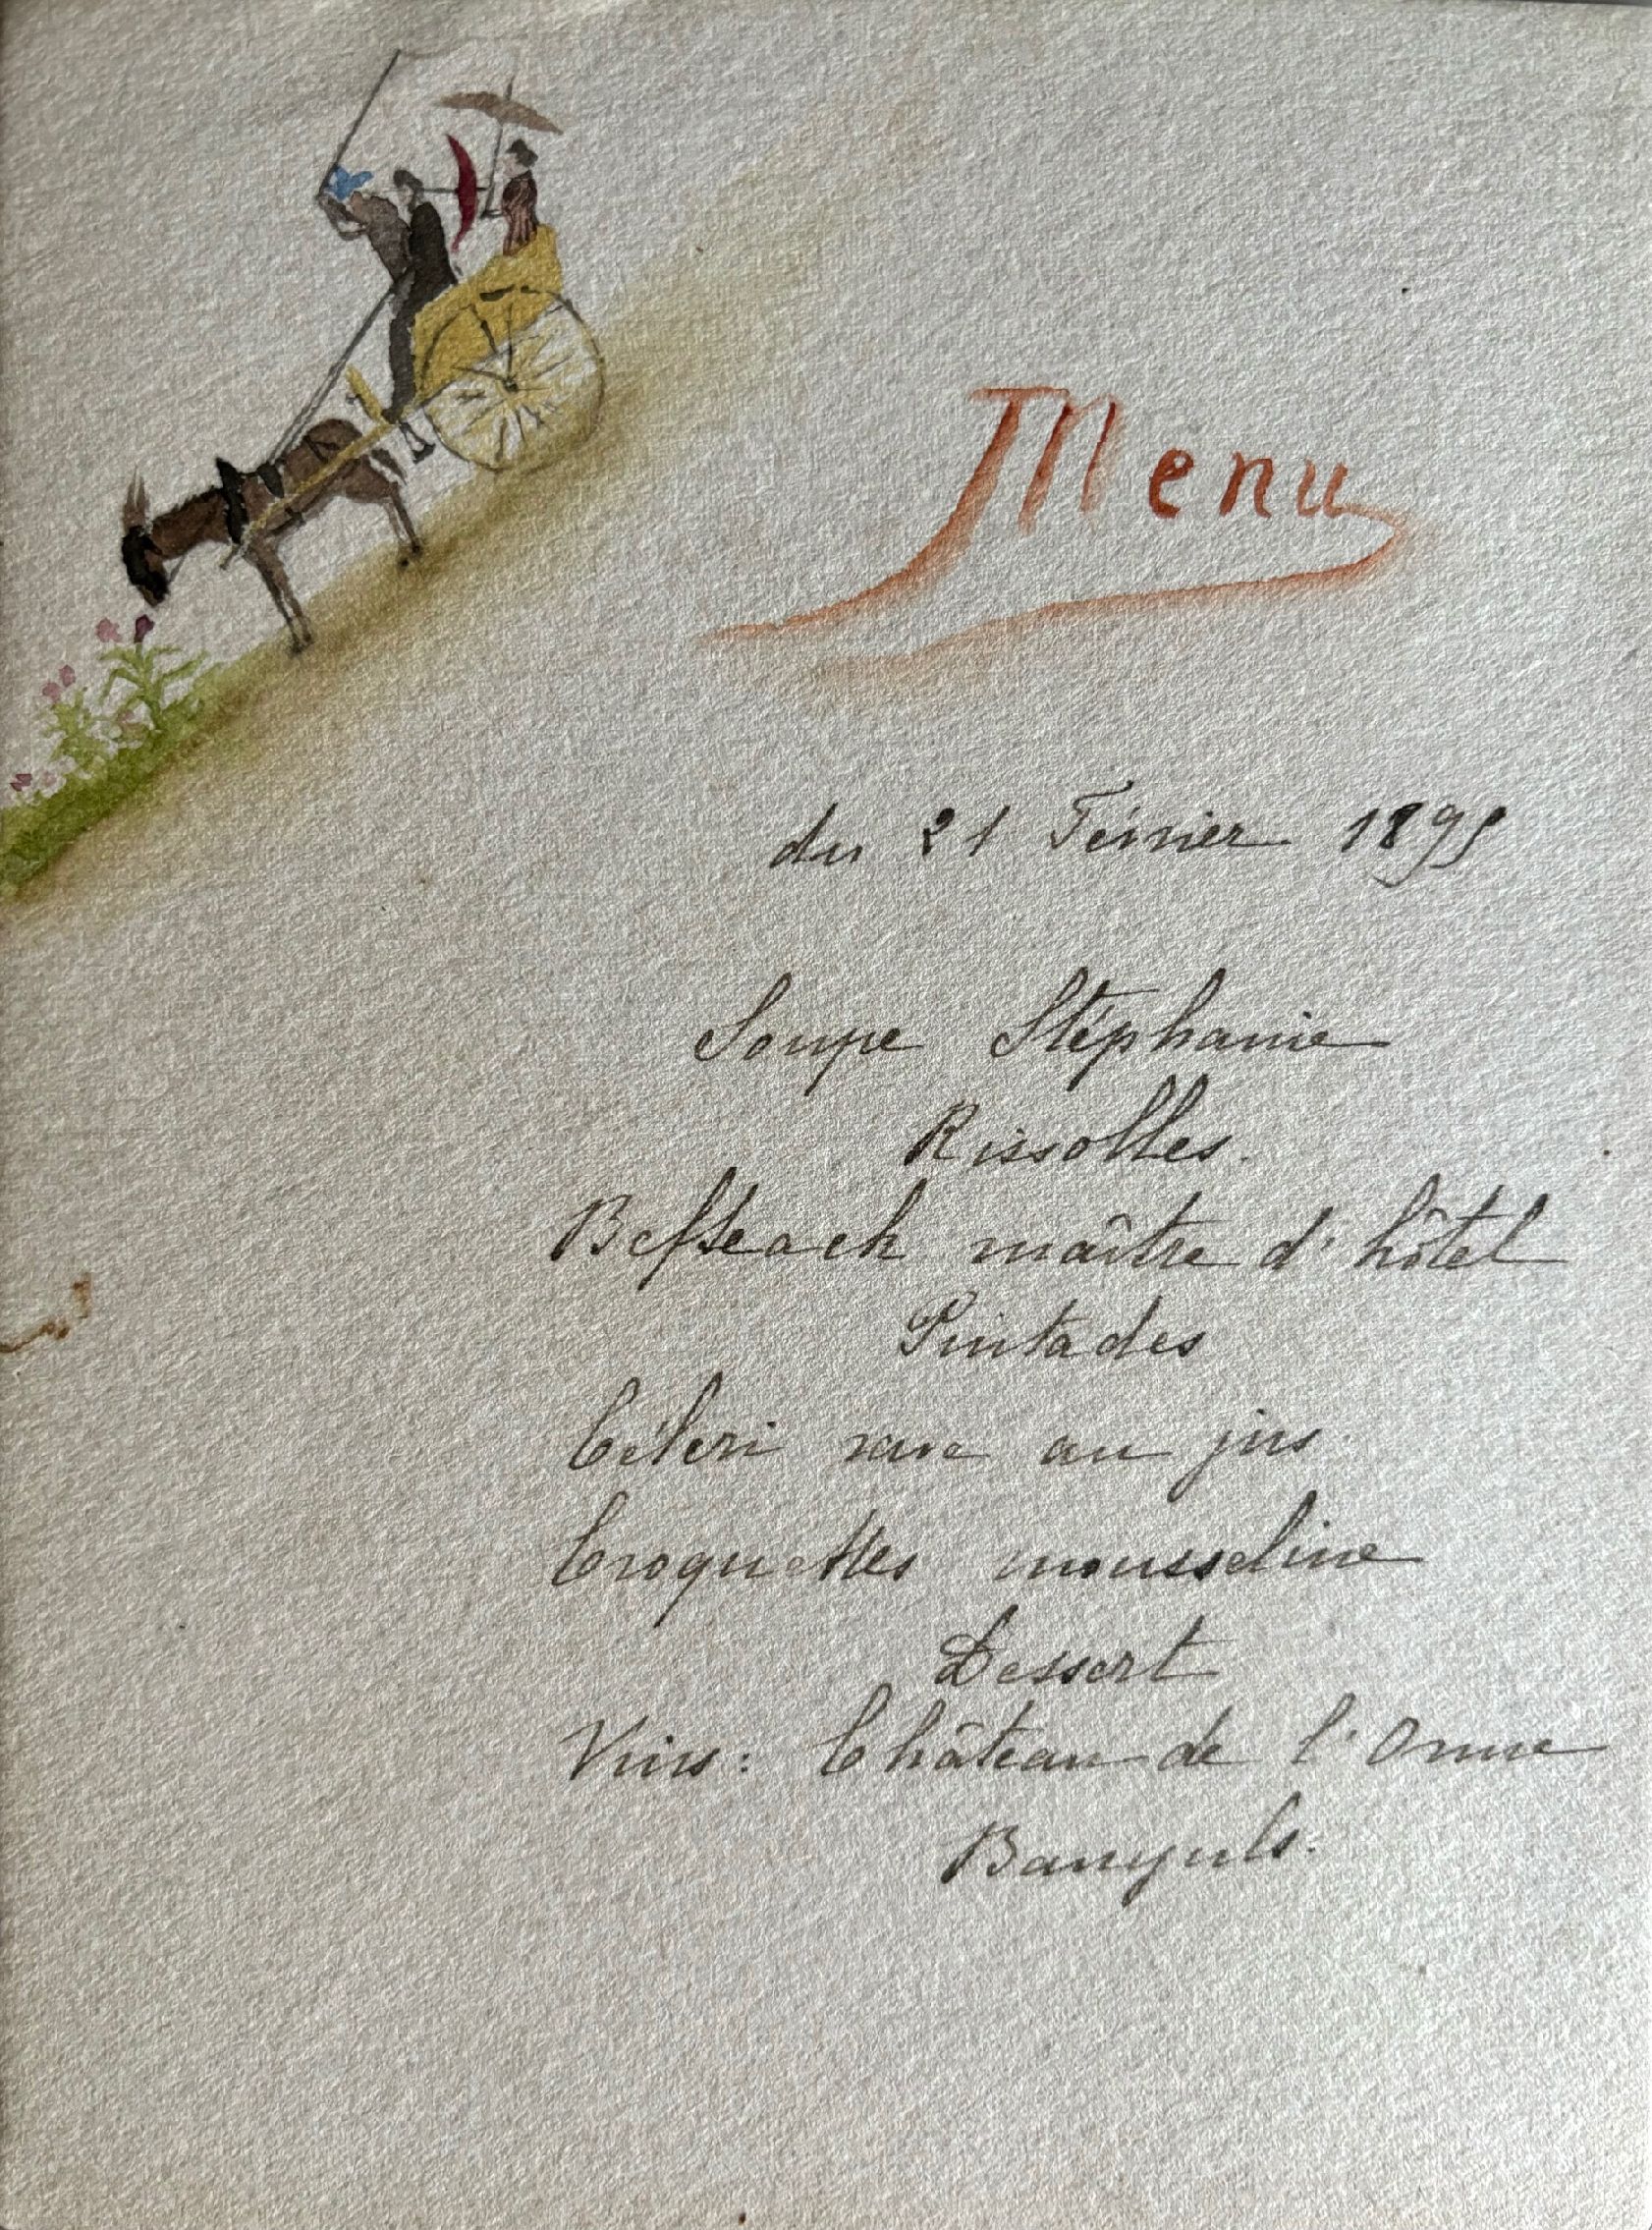 *NEW ARRIVAL* Two French menus